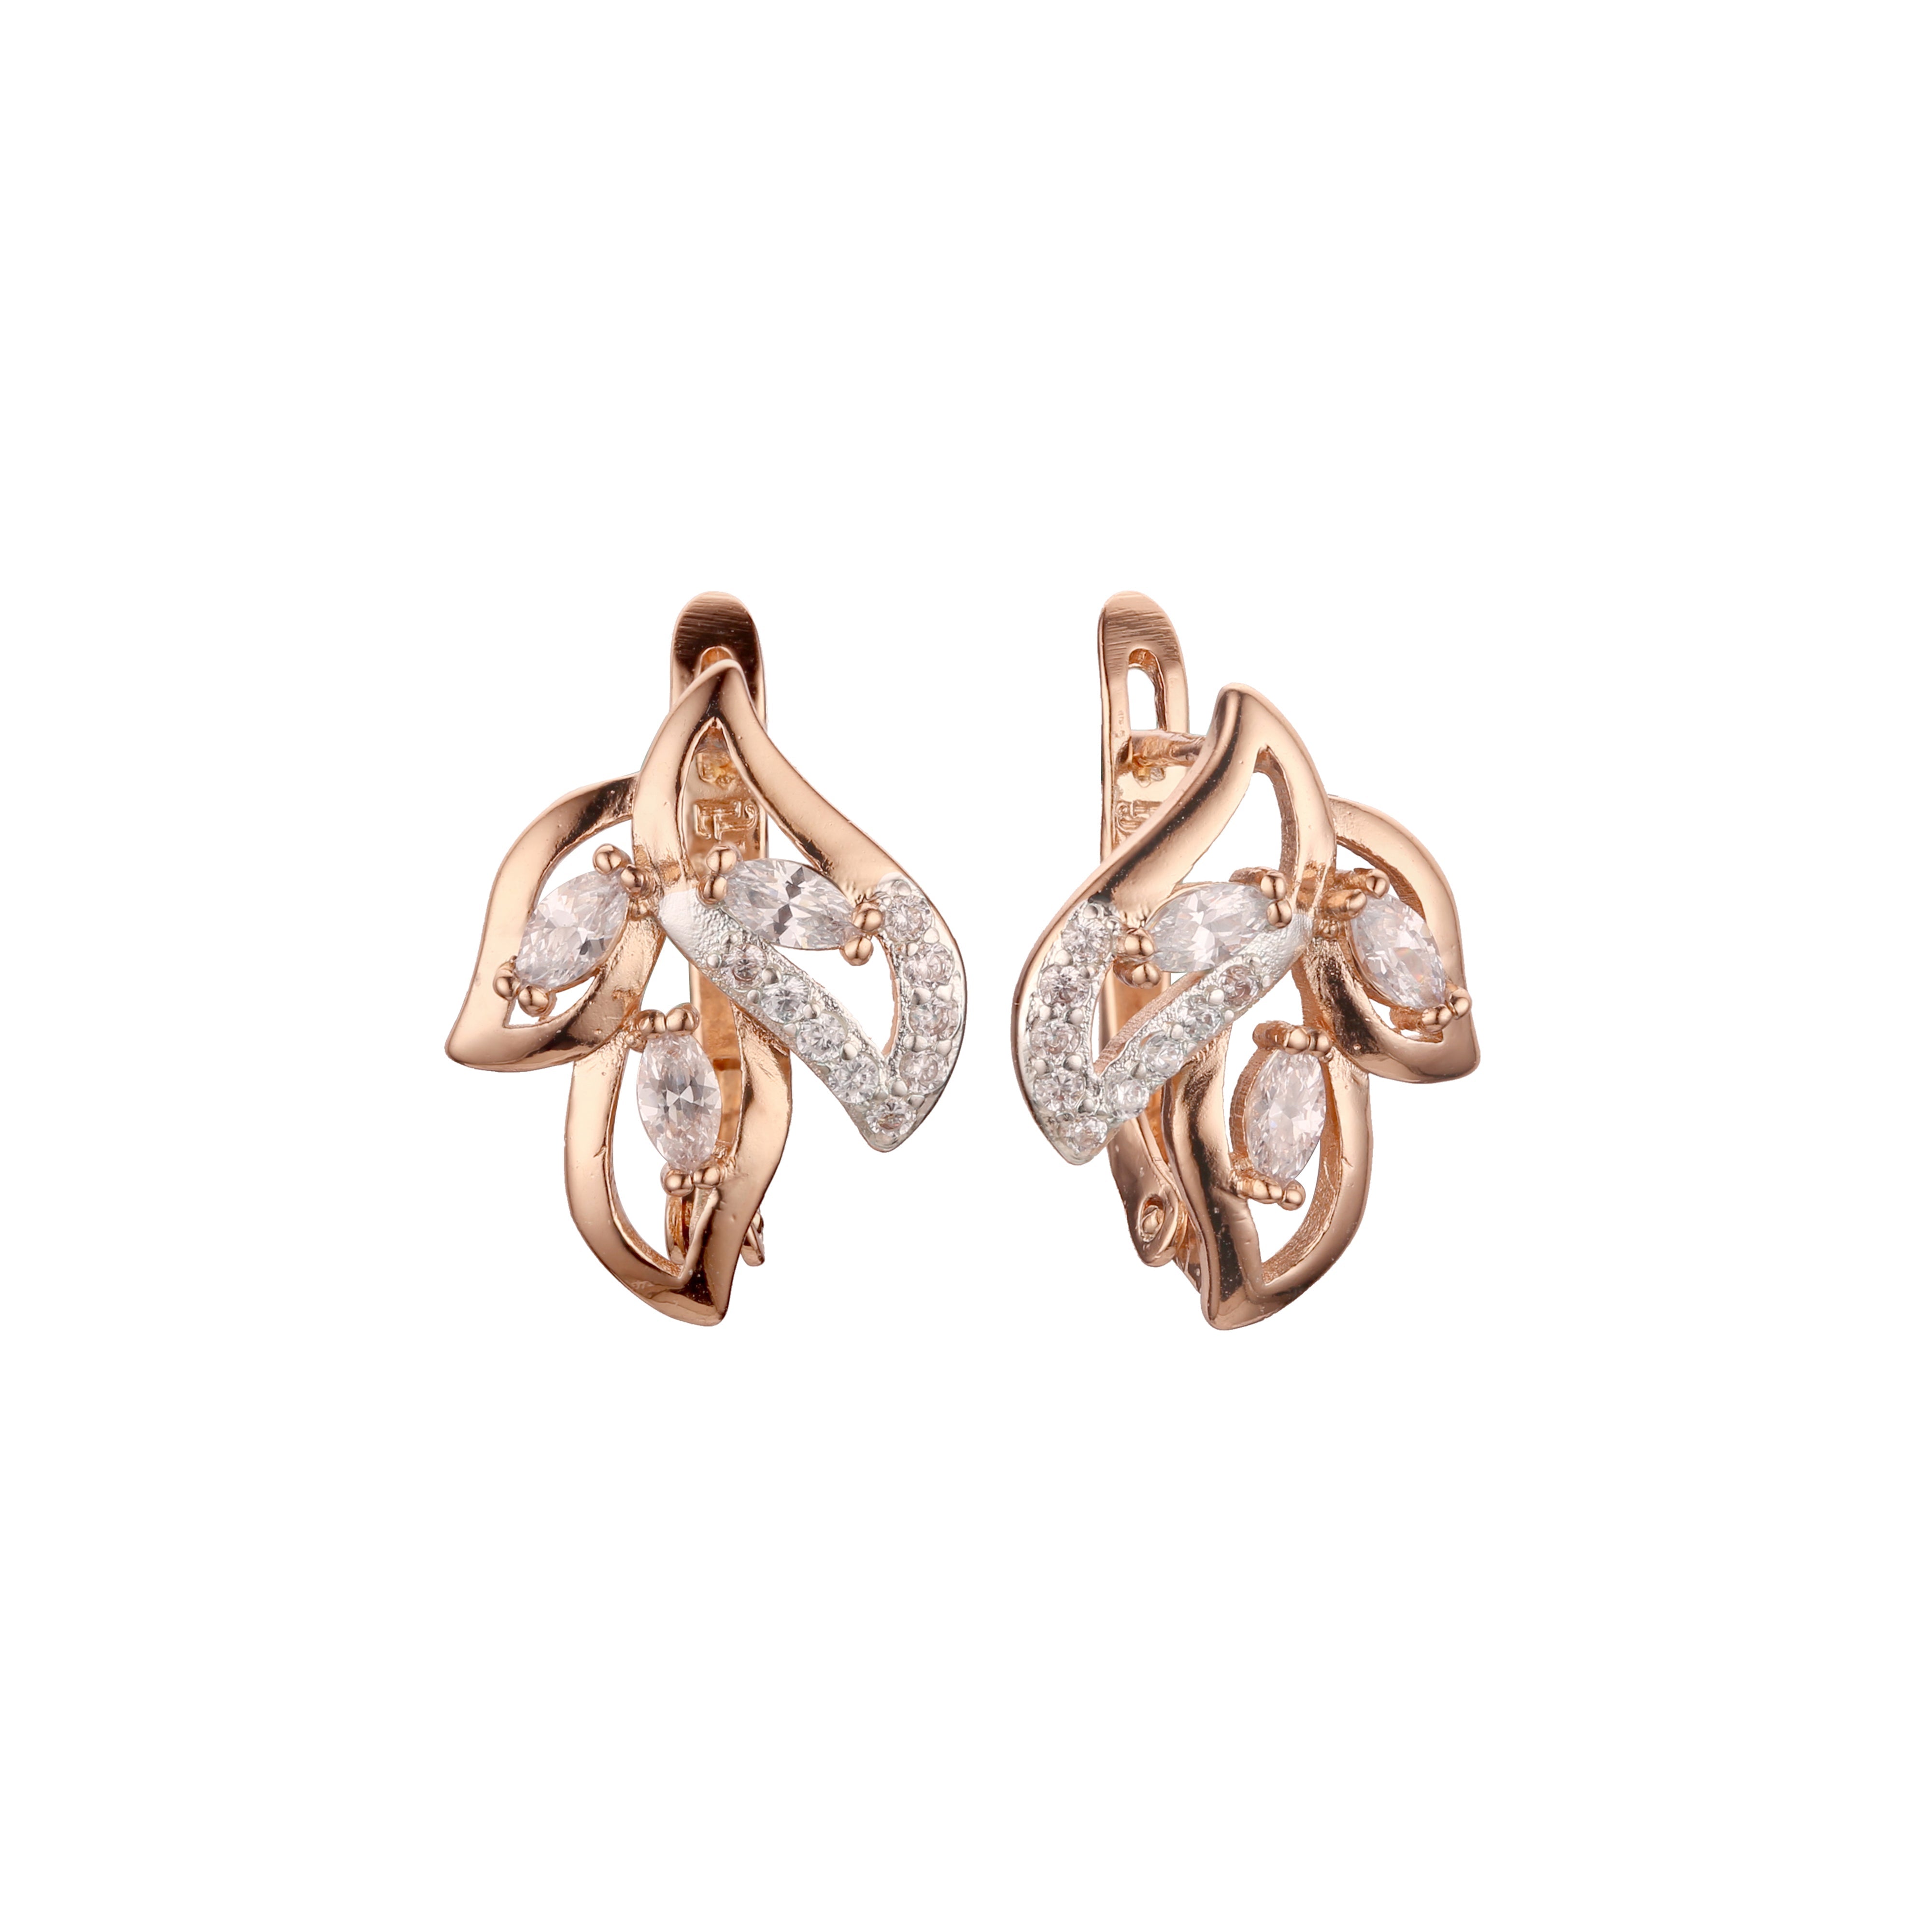 Three leaves cluster colorful CZ earrings in 14K Gold, Rose Gold, two tone plating colors